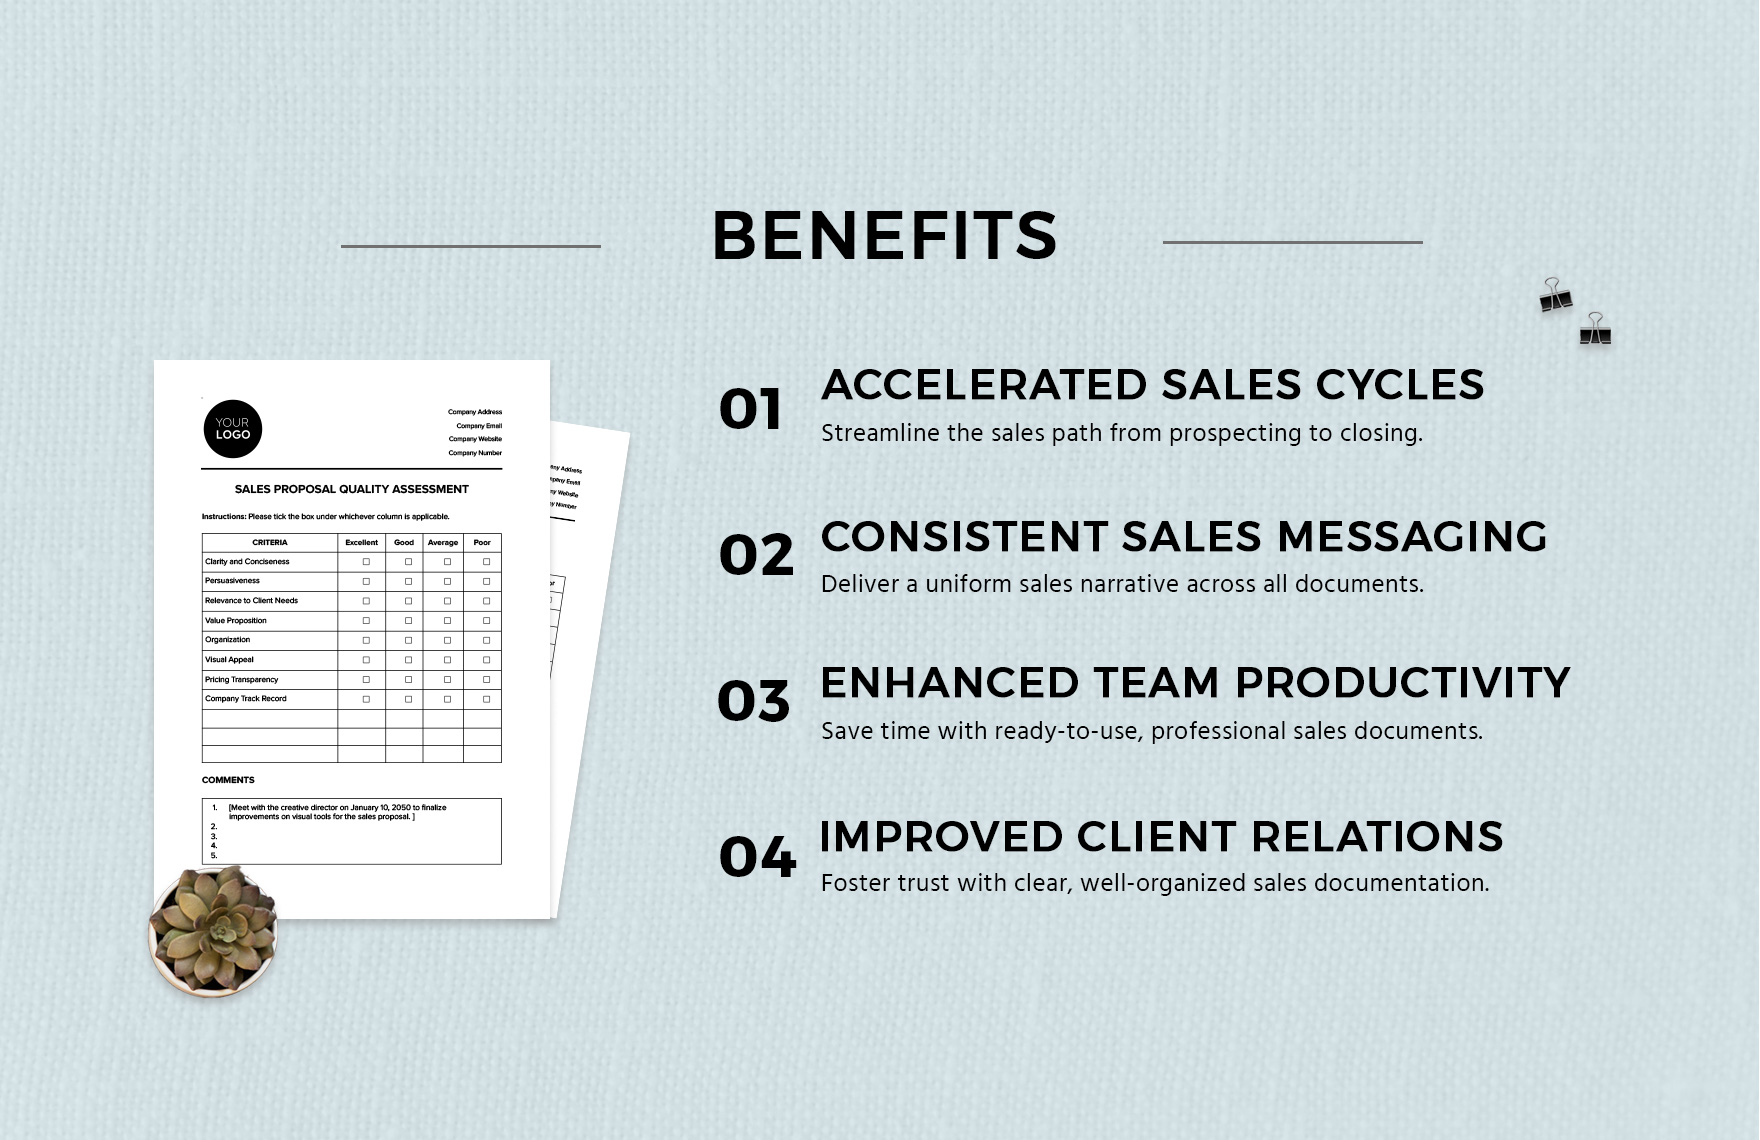  Sales Proposal Quality Assessment Template